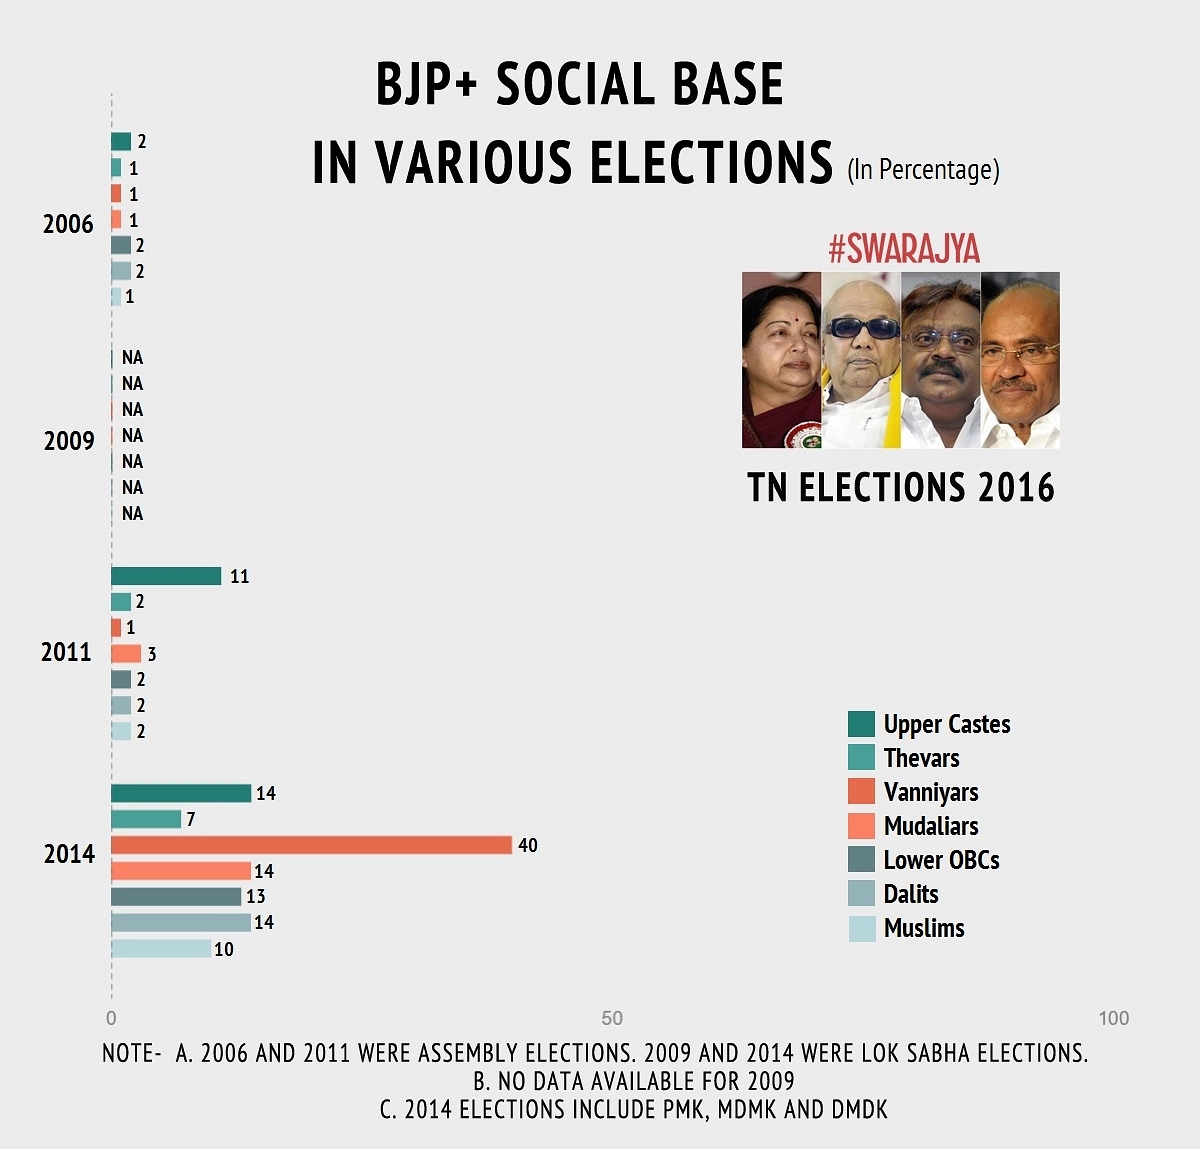 

The social base of BJP led alliance across different elections.